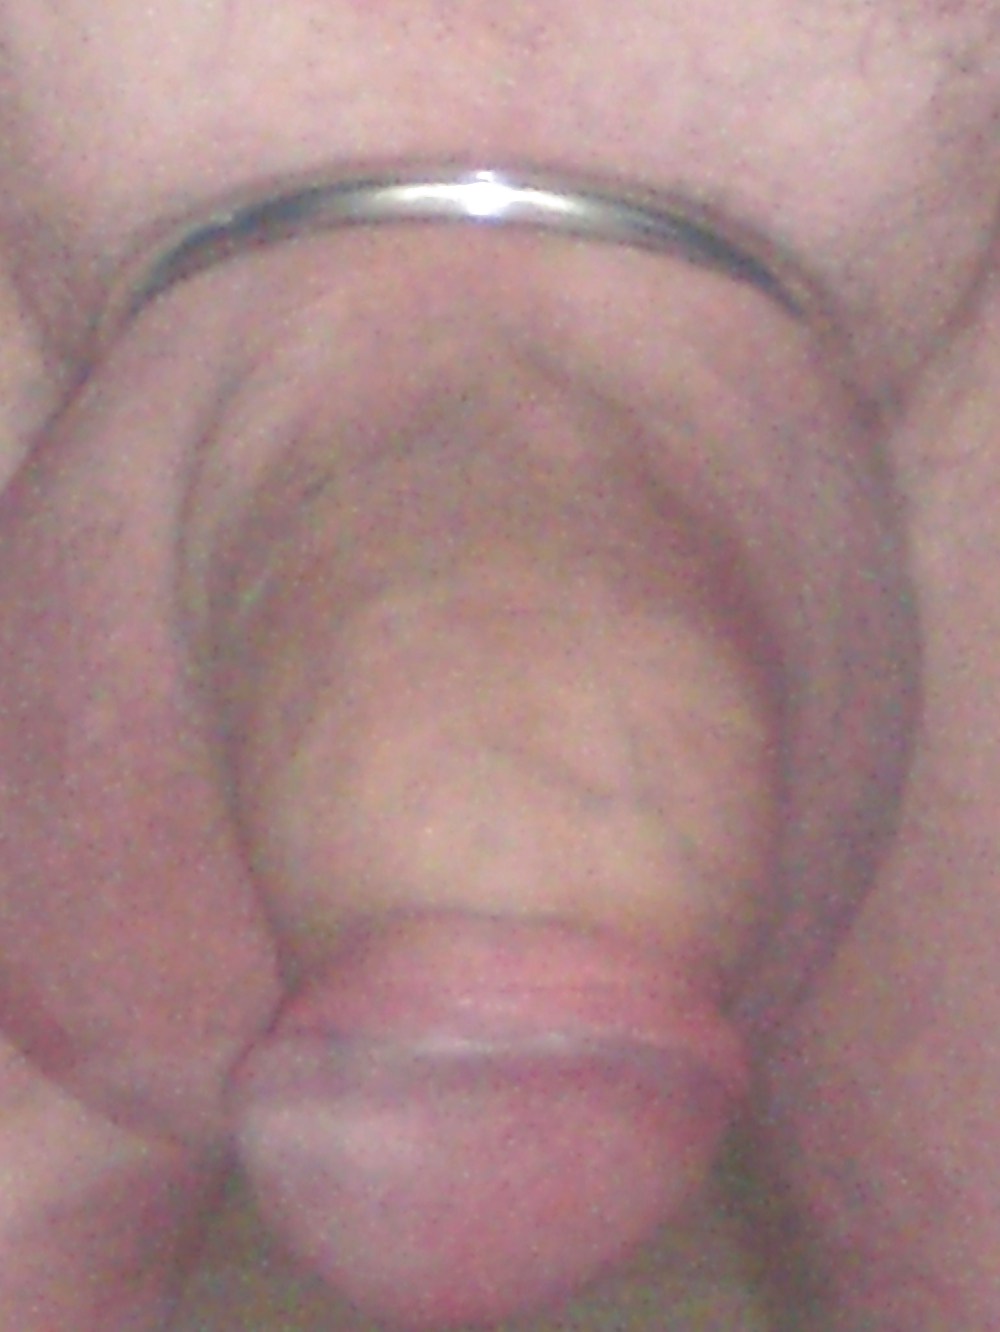 My New Cock Ring